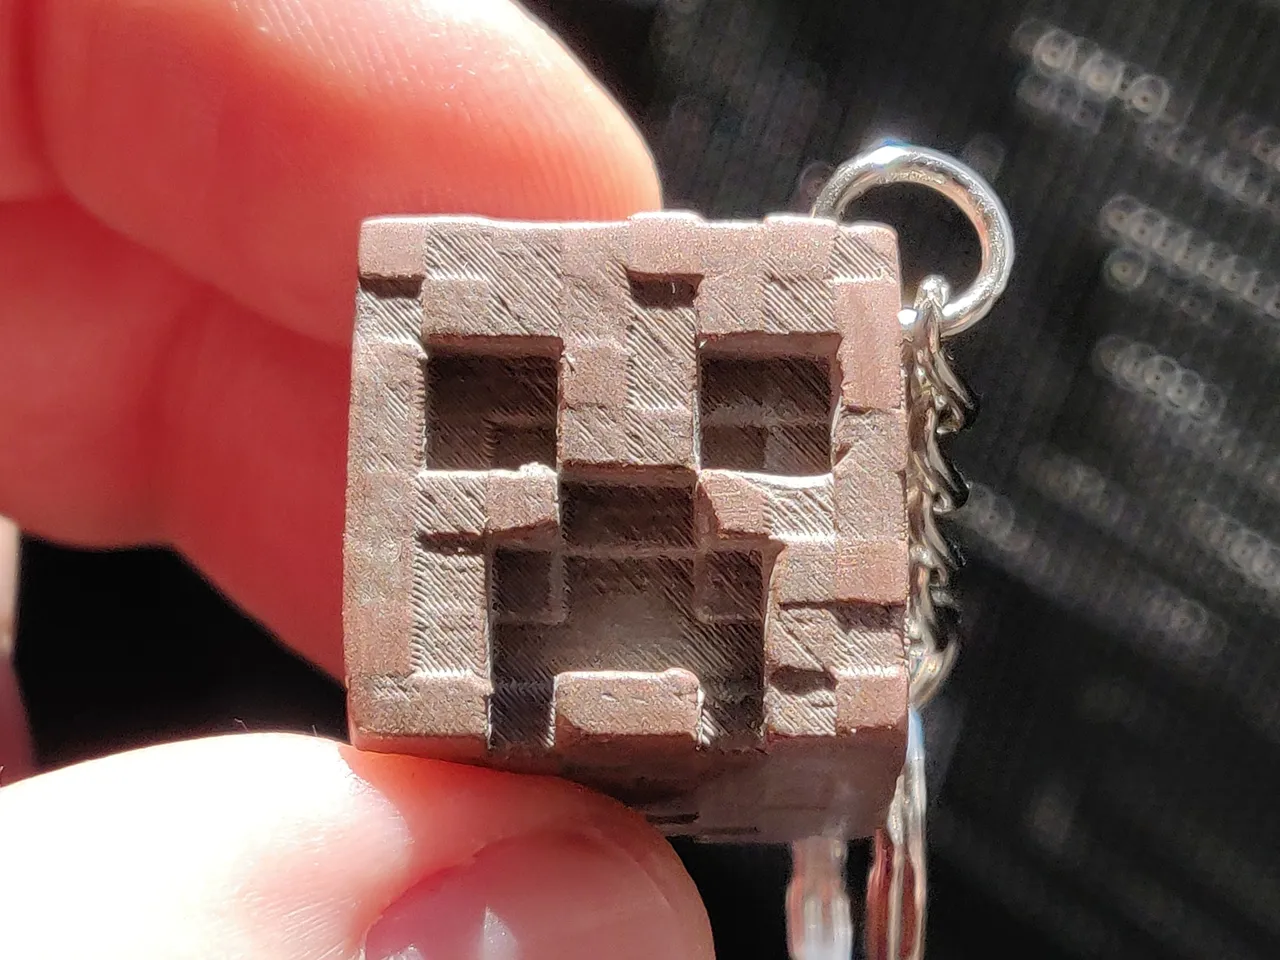 Minecraft Creeper Face and TNT Double-Sided Keychain